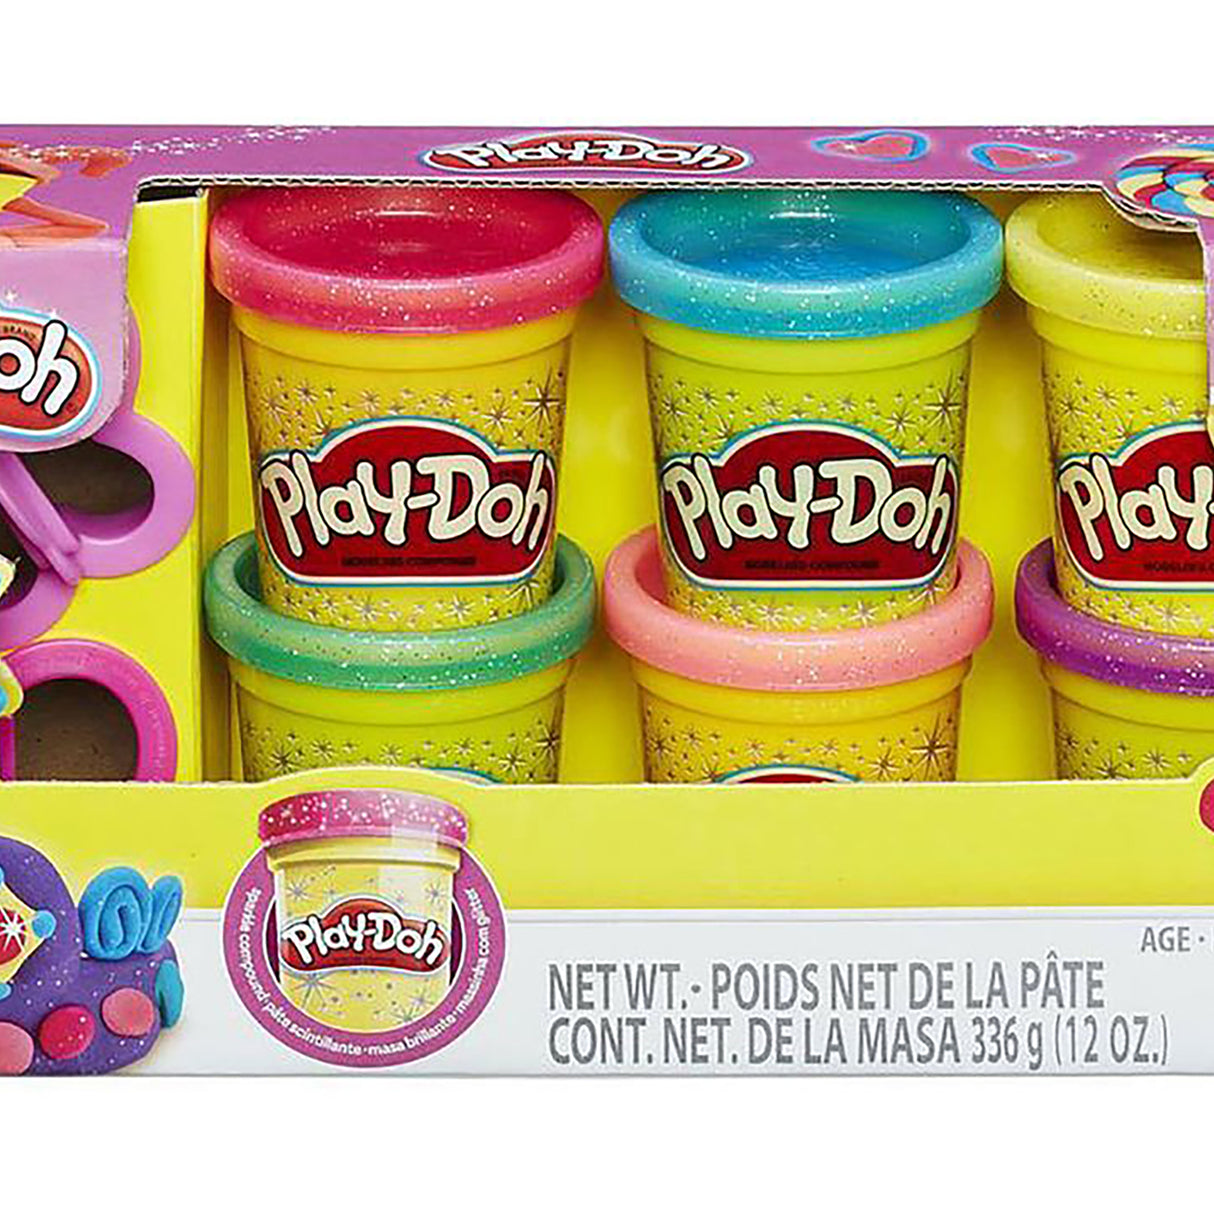 Play-Doh Sparkle Compound Collection (Pack of 6)